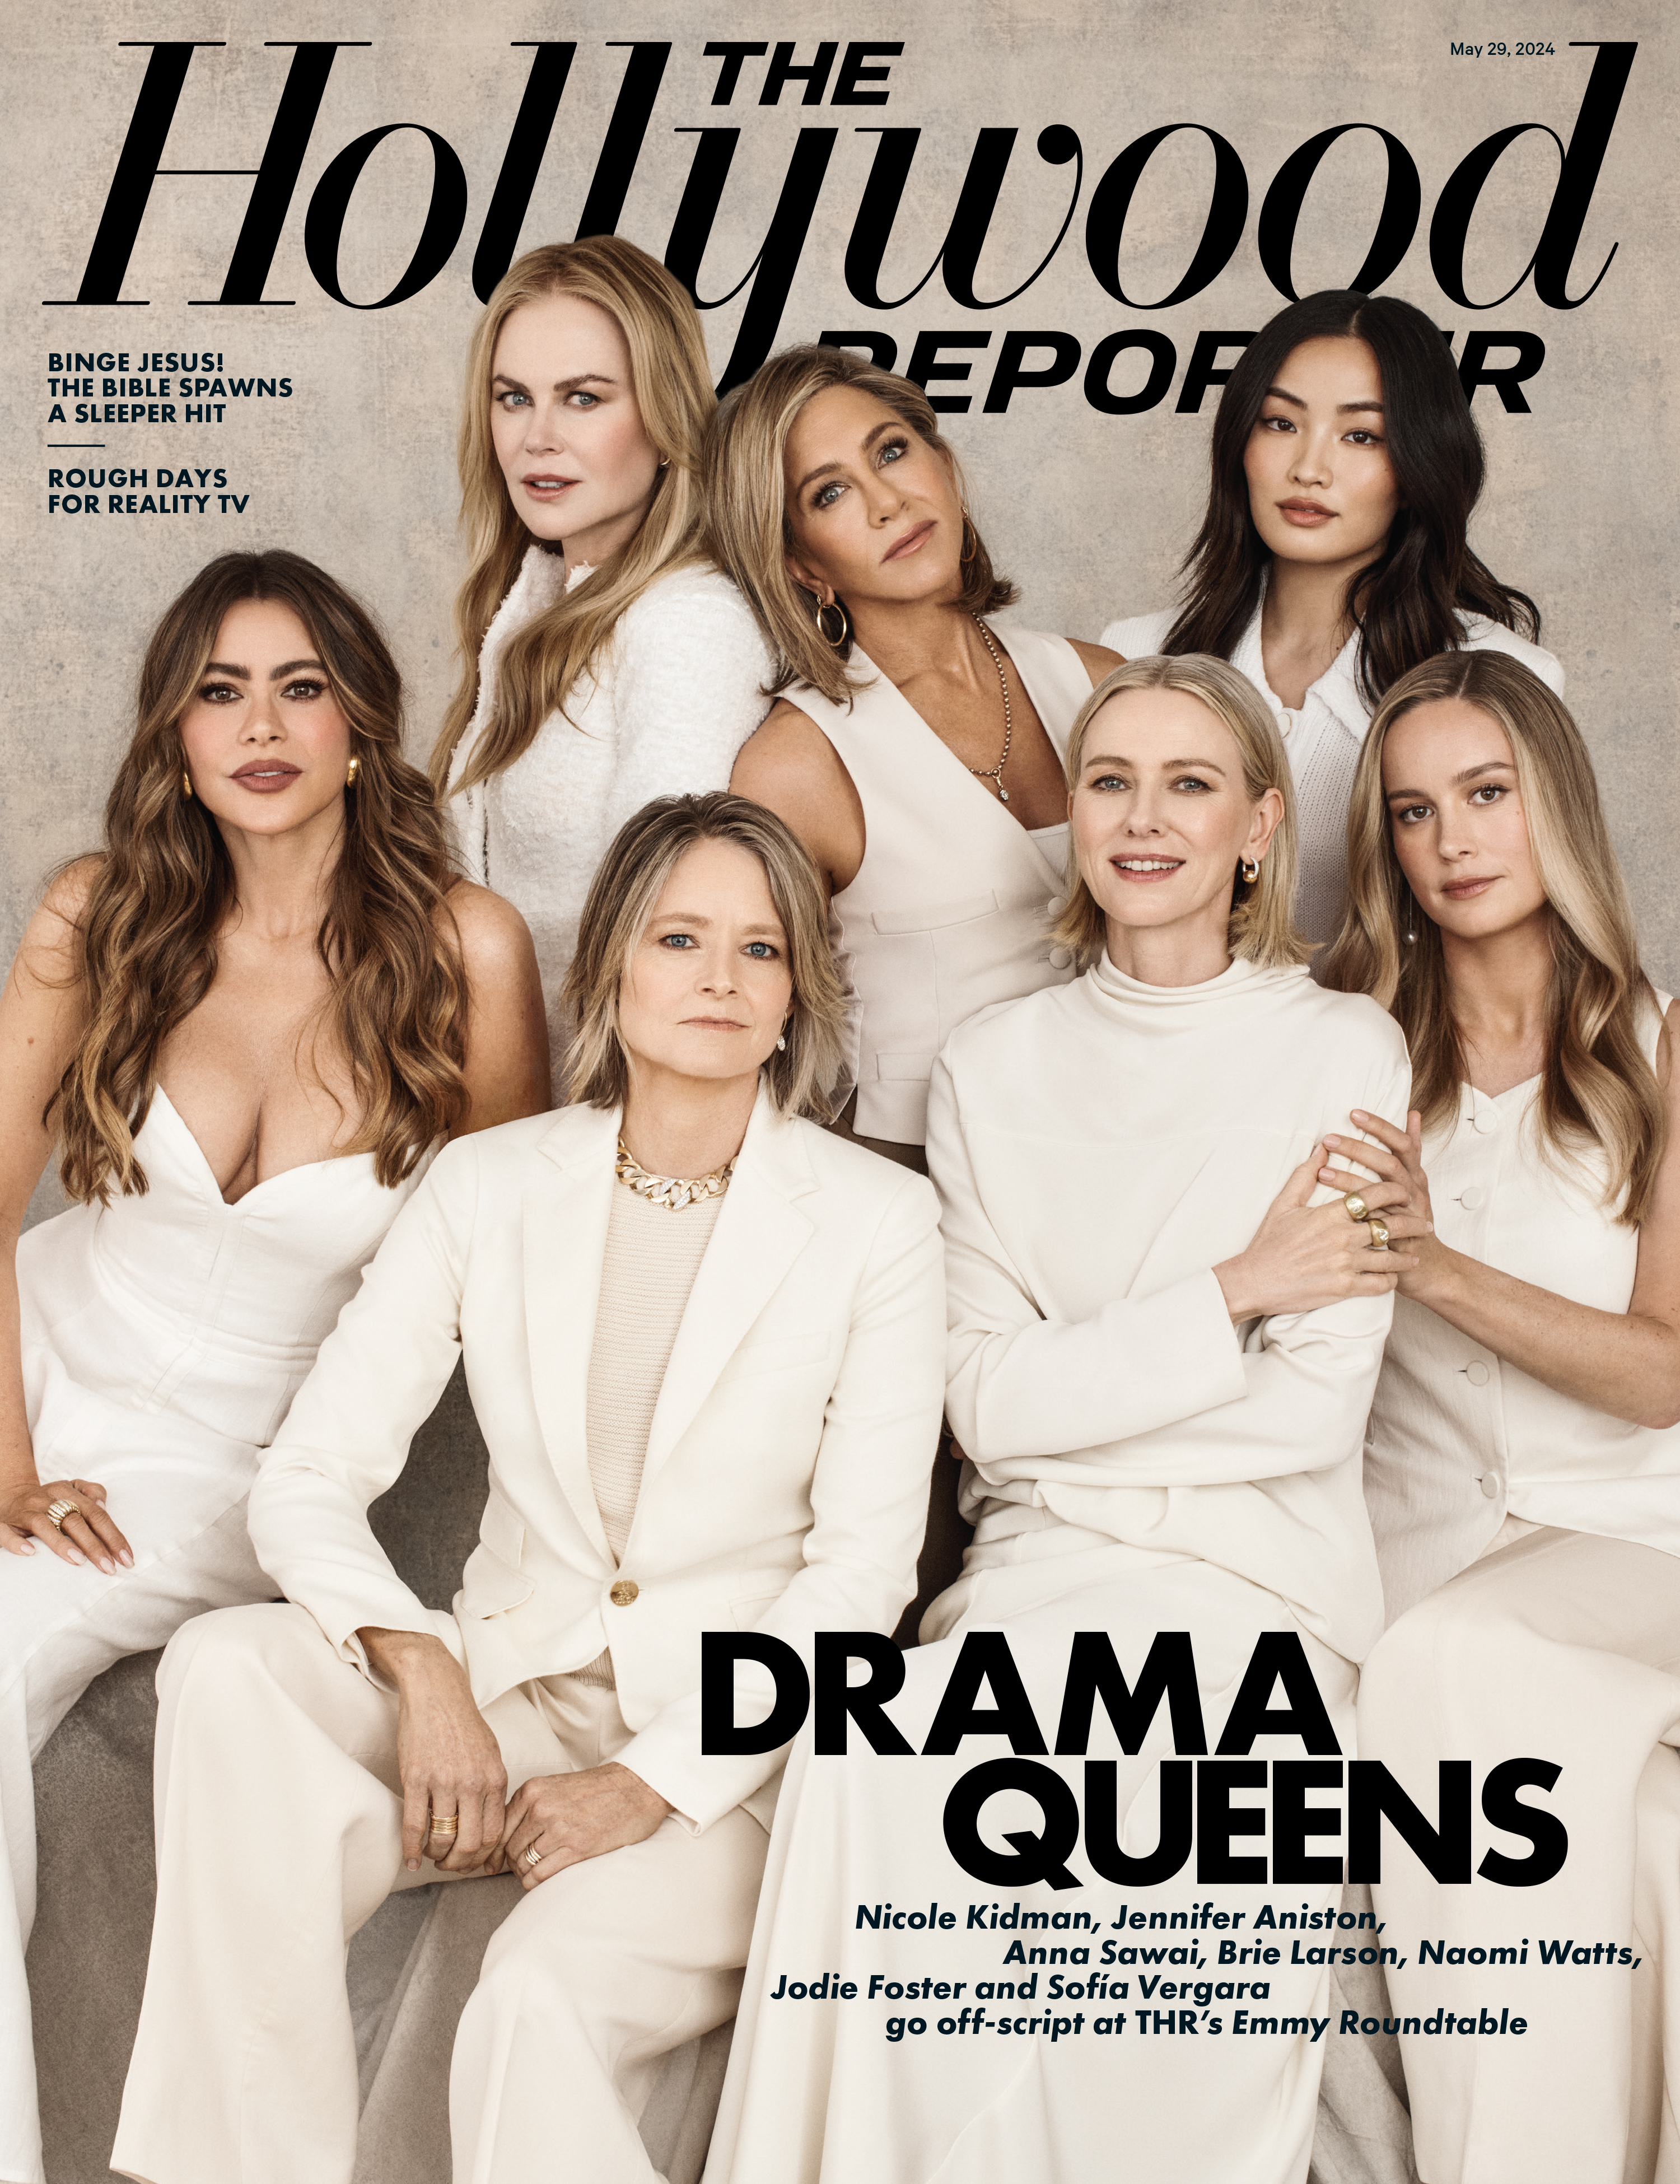 The Hollywood Reporter brought in some of the movie industry's top actresses for their new issue